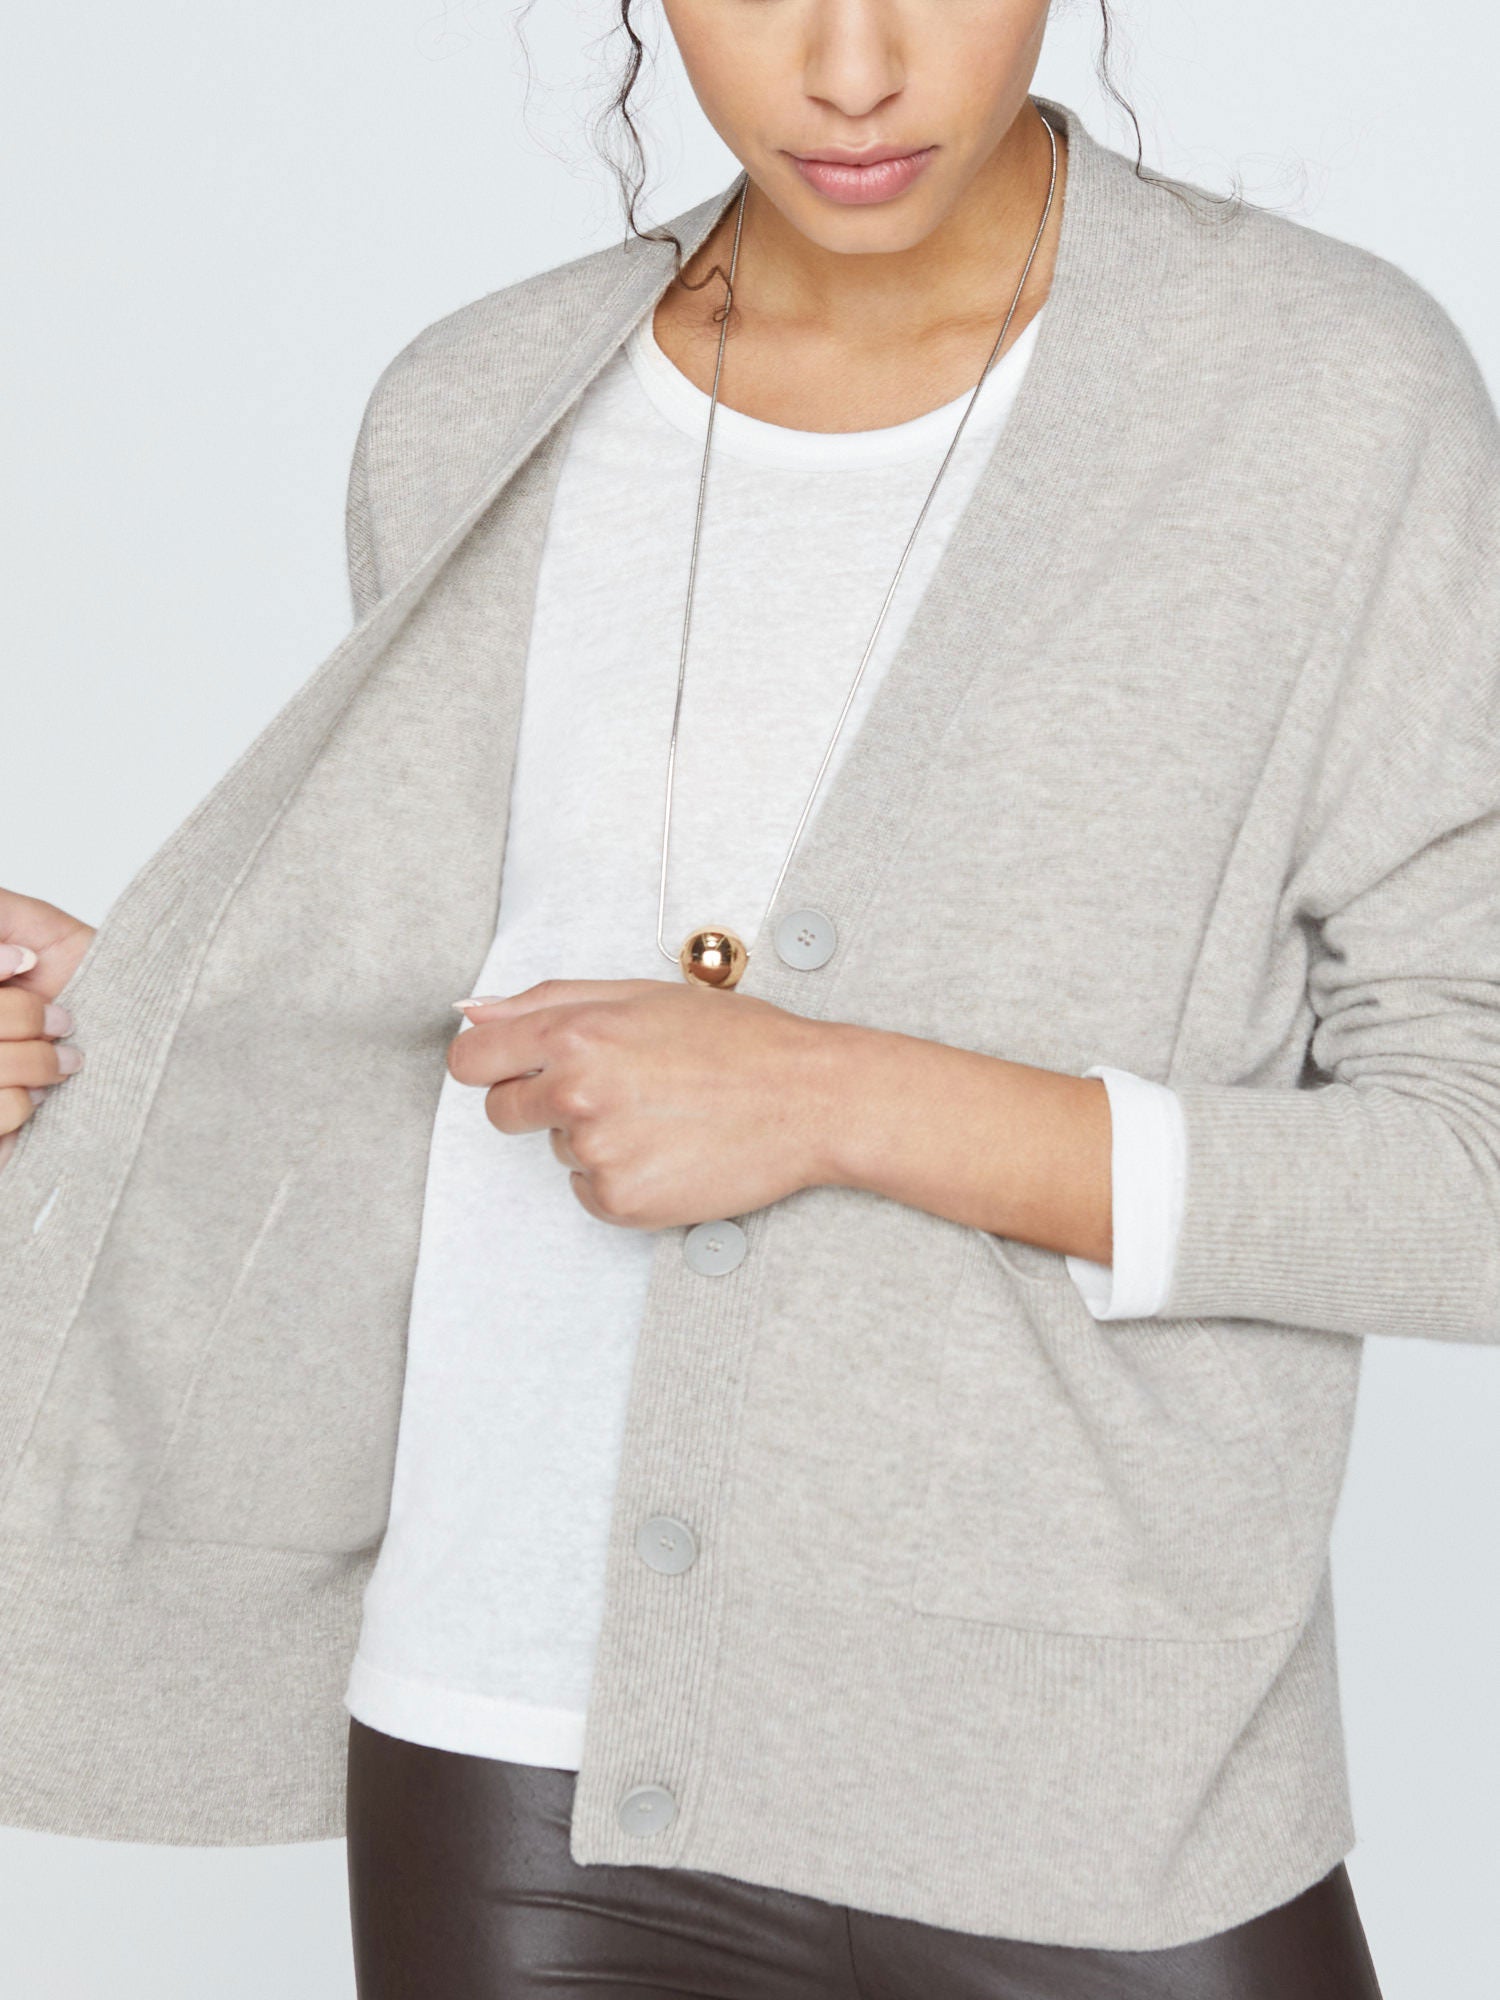 Halo light grey cashmere wool cardigan sweater front view 2